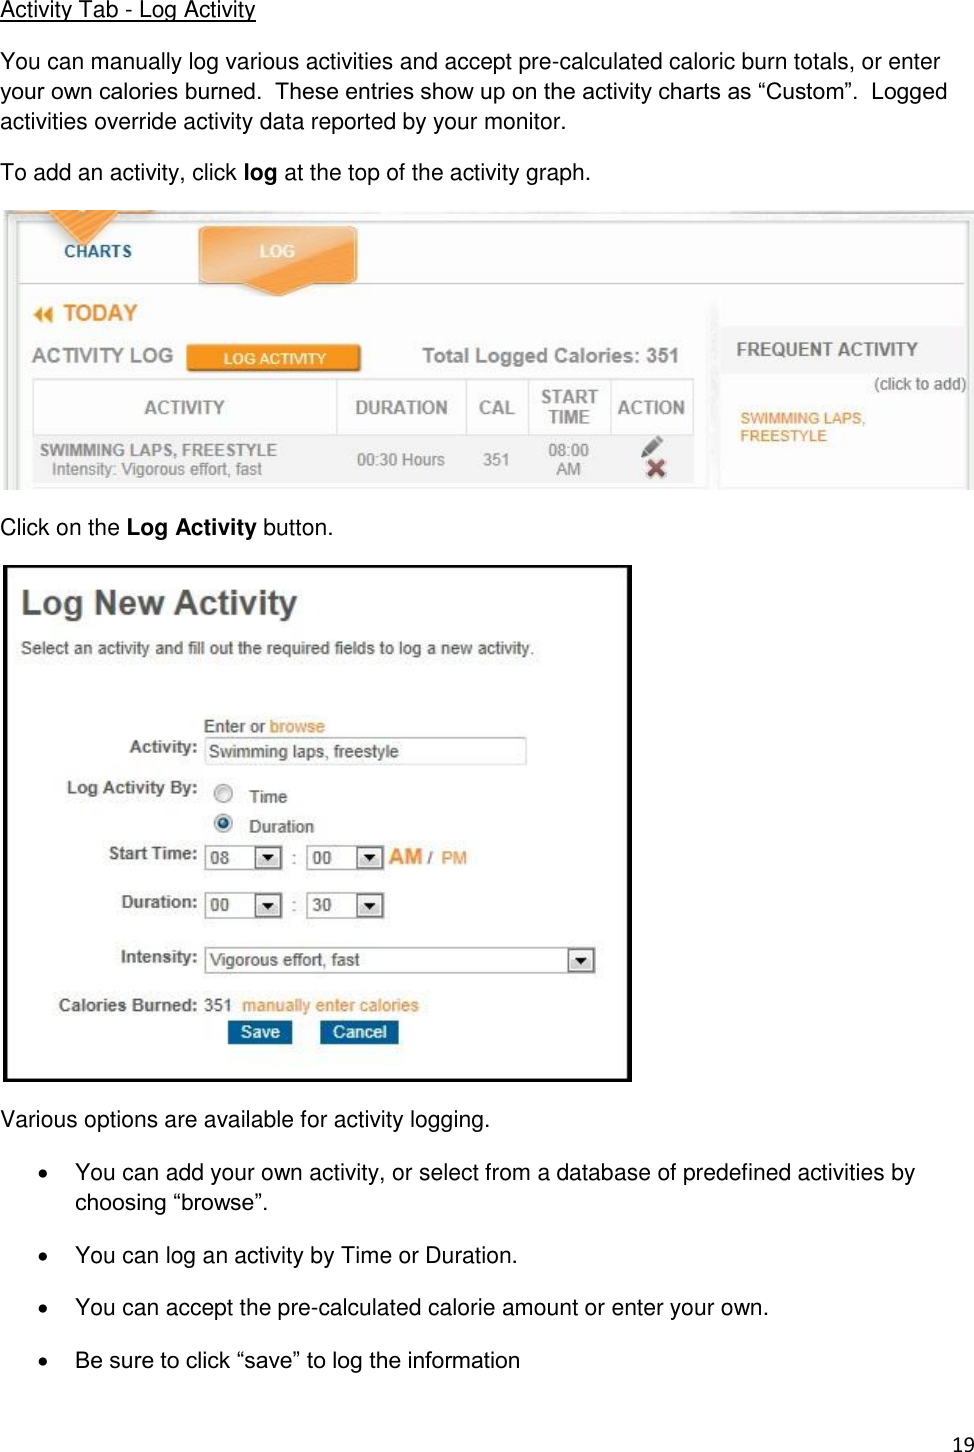 19 Activity Tab - Log Activity You can manually log various activities and accept pre-calculated caloric burn totals, or enter your own calories burned.  These entries show up on the activity charts as “Custom”.  Logged activities override activity data reported by your monitor. To add an activity, click log at the top of the activity graph.  Click on the Log Activity button.  Various options are available for activity logging.   You can add your own activity, or select from a database of predefined activities by choosing “browse”.   You can log an activity by Time or Duration.   You can accept the pre-calculated calorie amount or enter your own.  Be sure to click “save” to log the information  